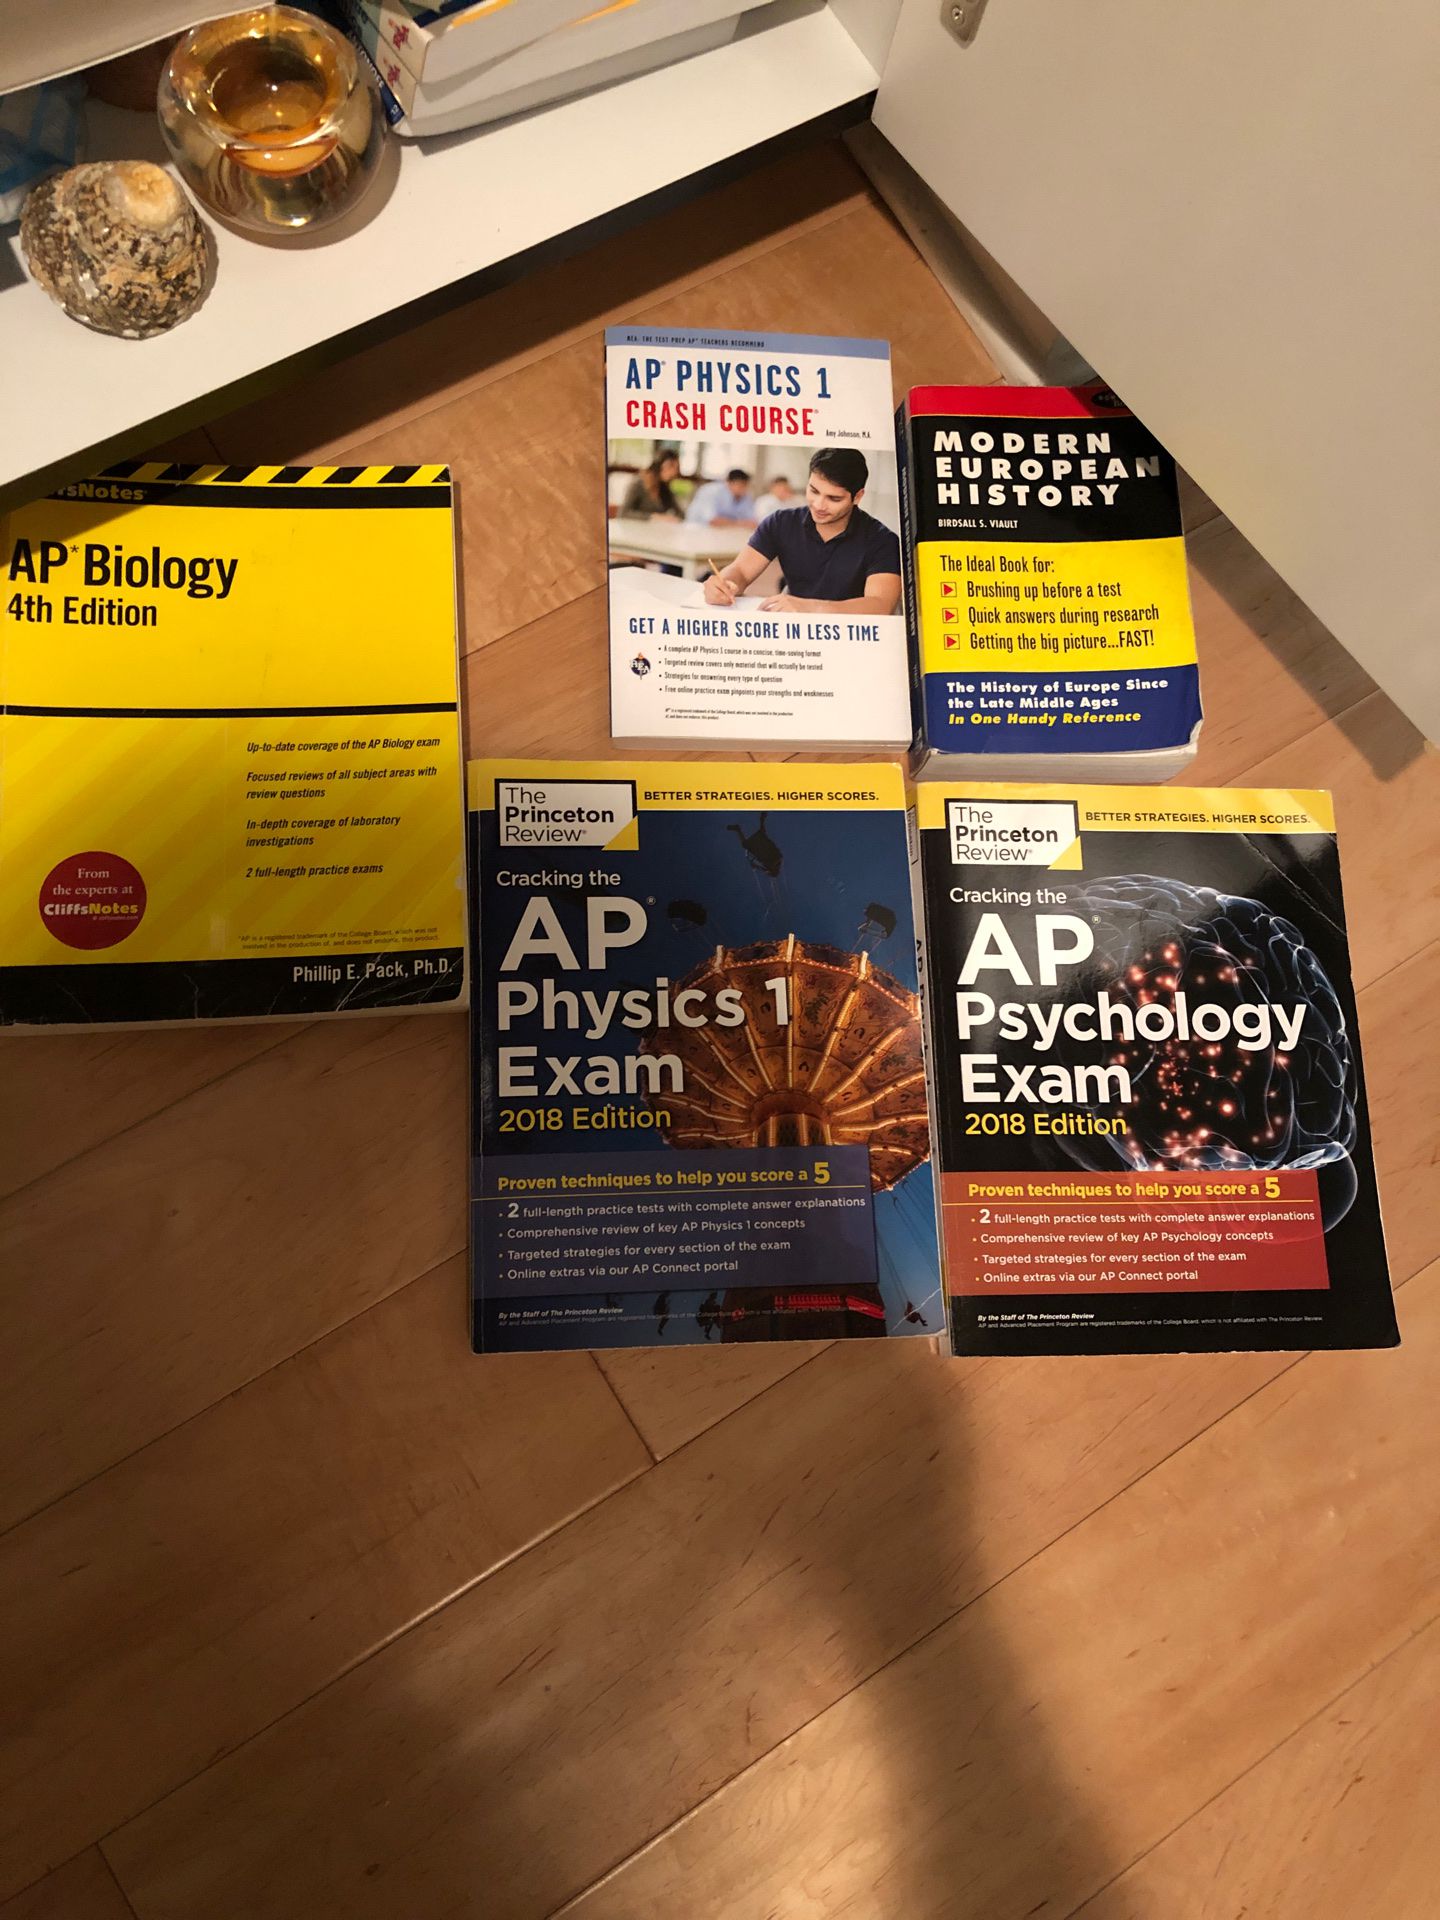 Books for AP subjects